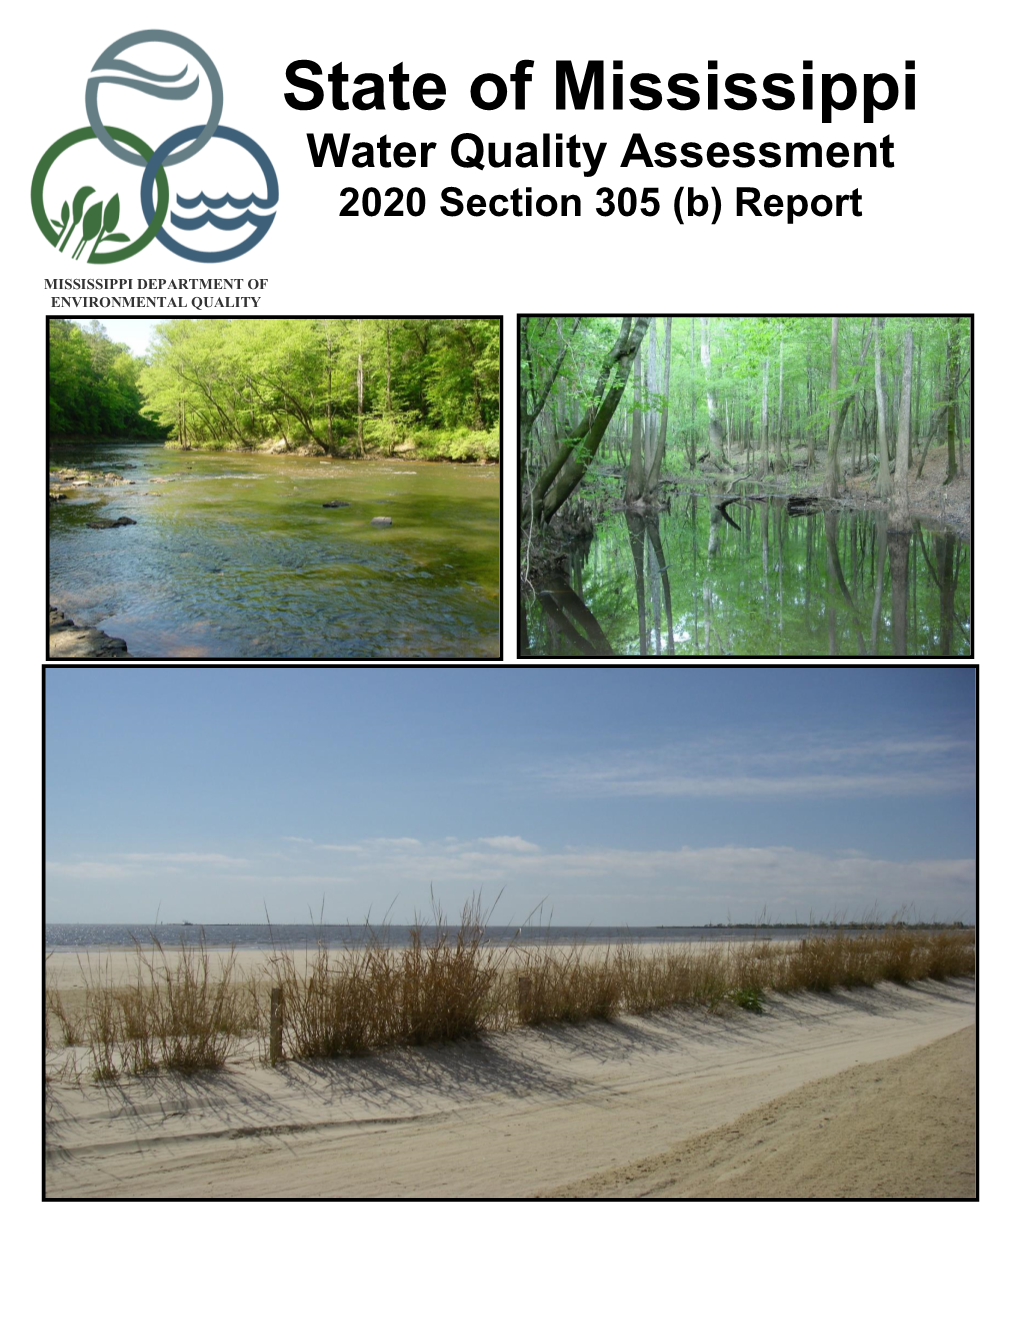 Mississippi 2020 Statewide 305(B) Water Quality Report